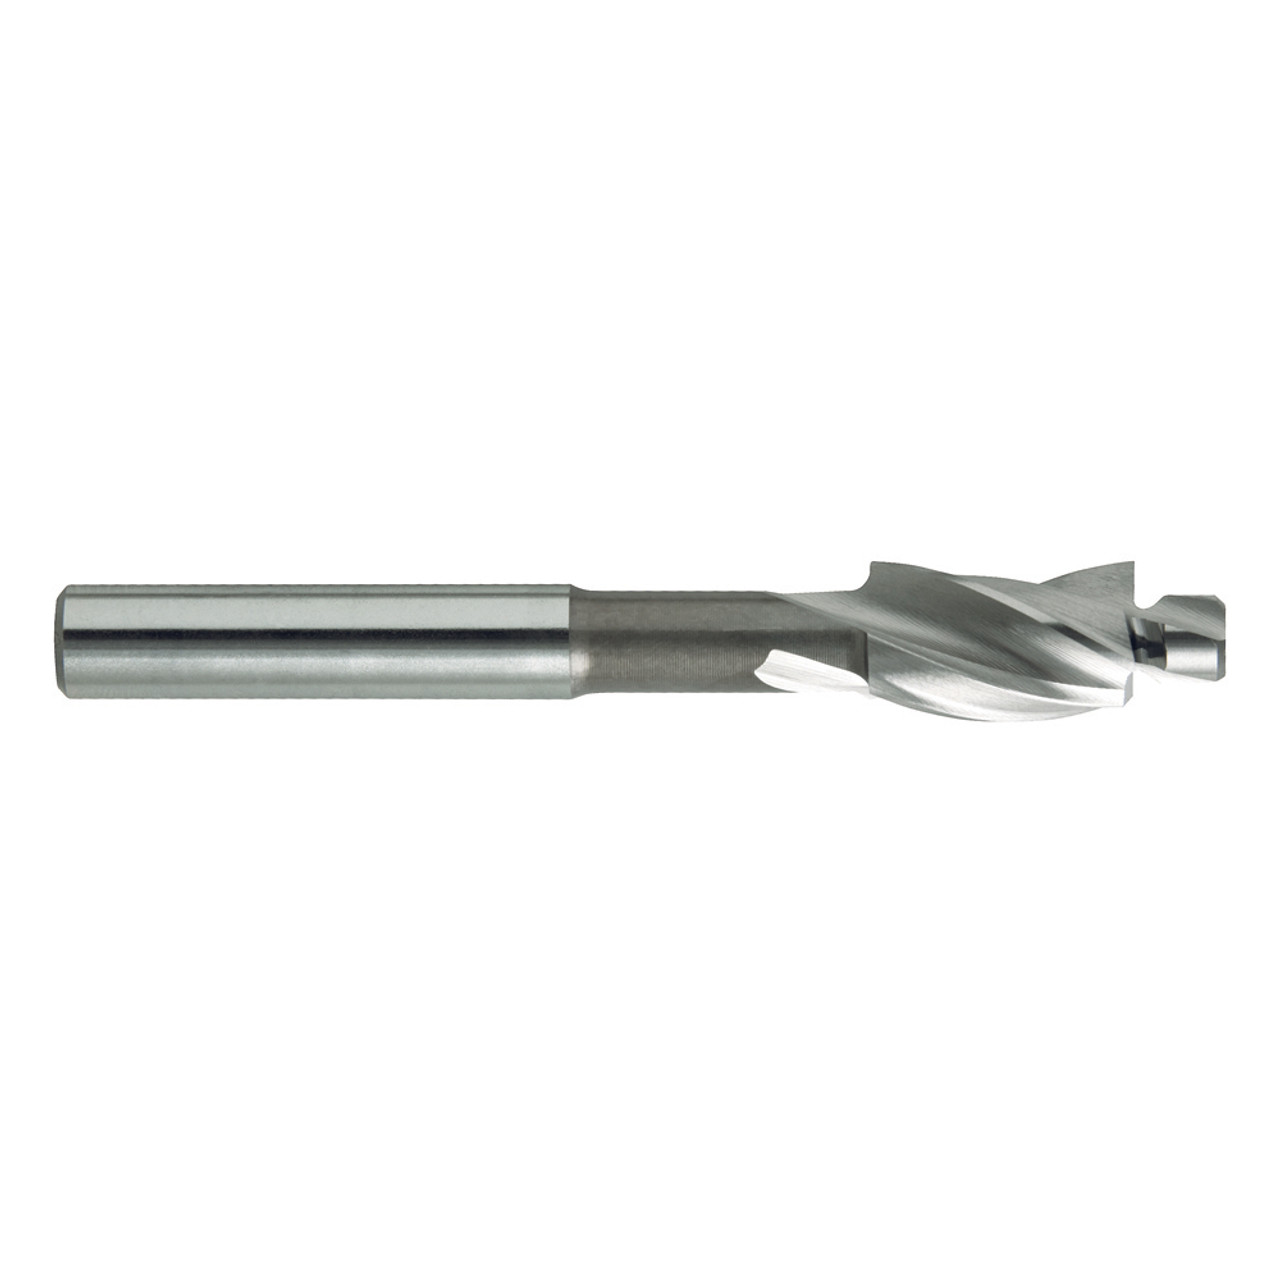 Counterbore C100 10.0Mm N Din373 Hss-Co